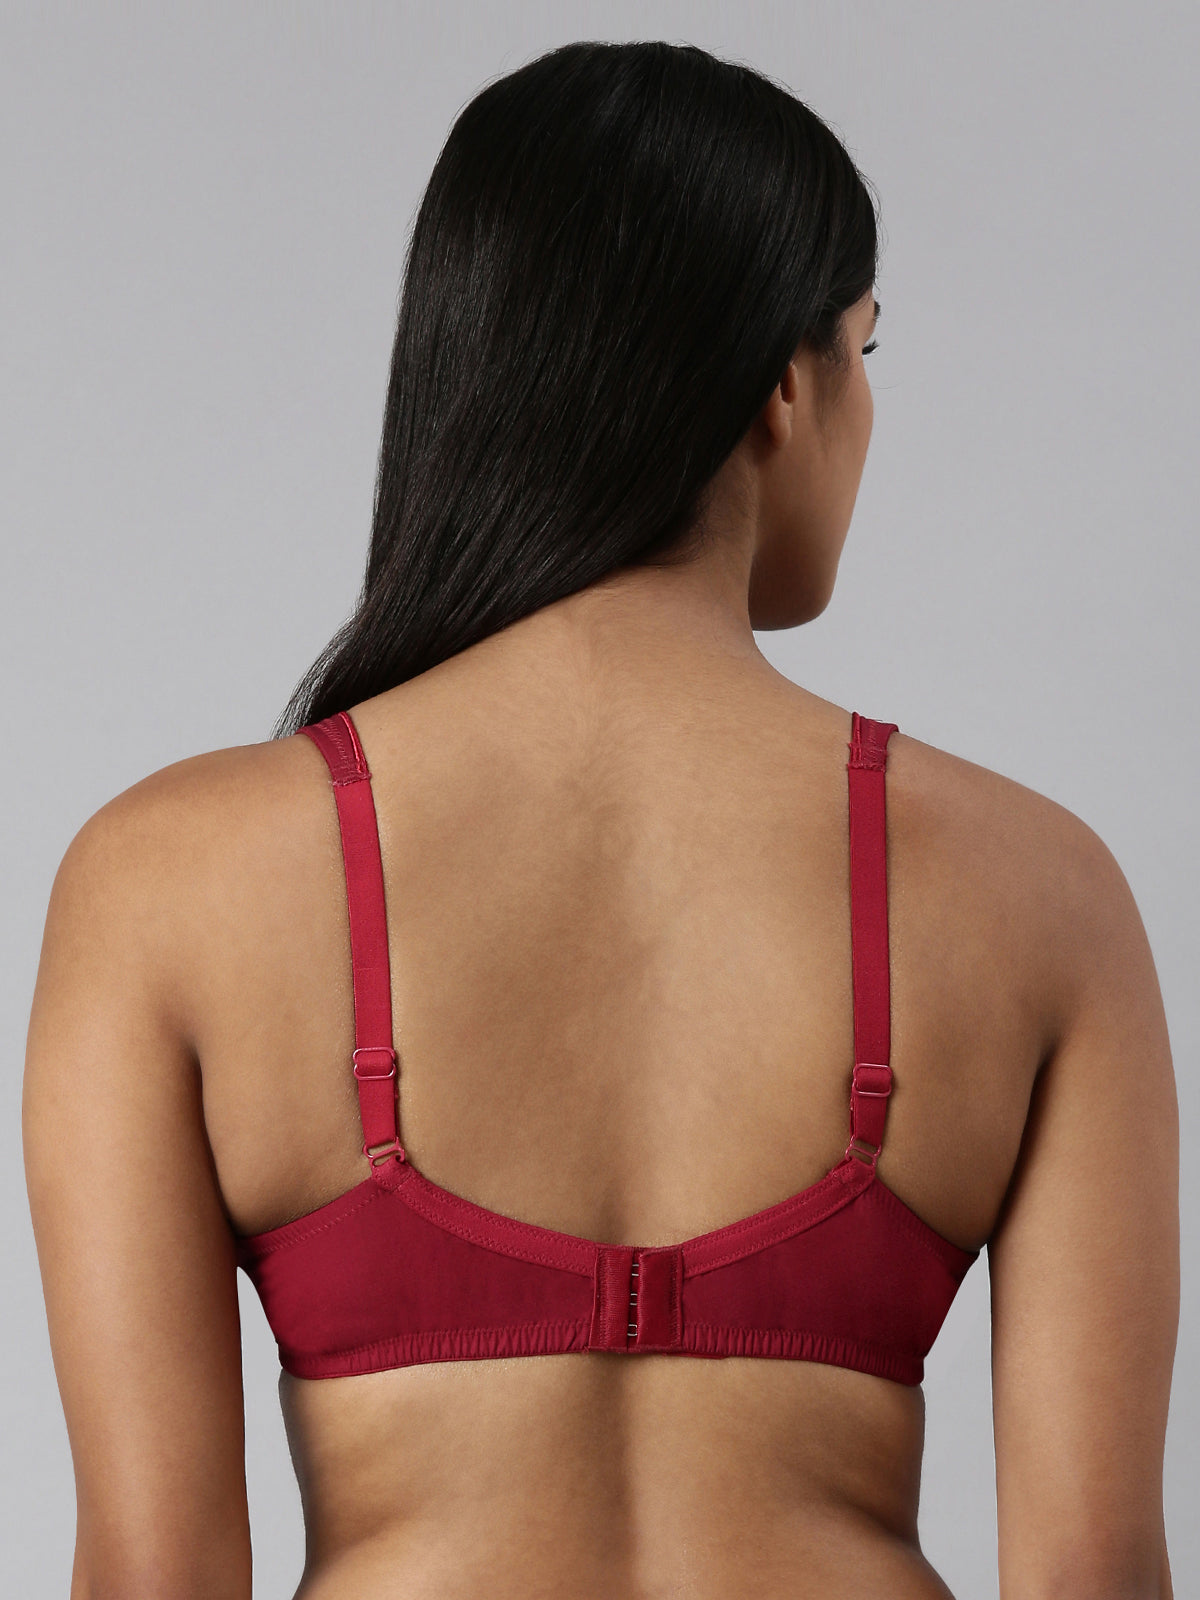 blossom-circlet-maroon4-woven knitted-support bra